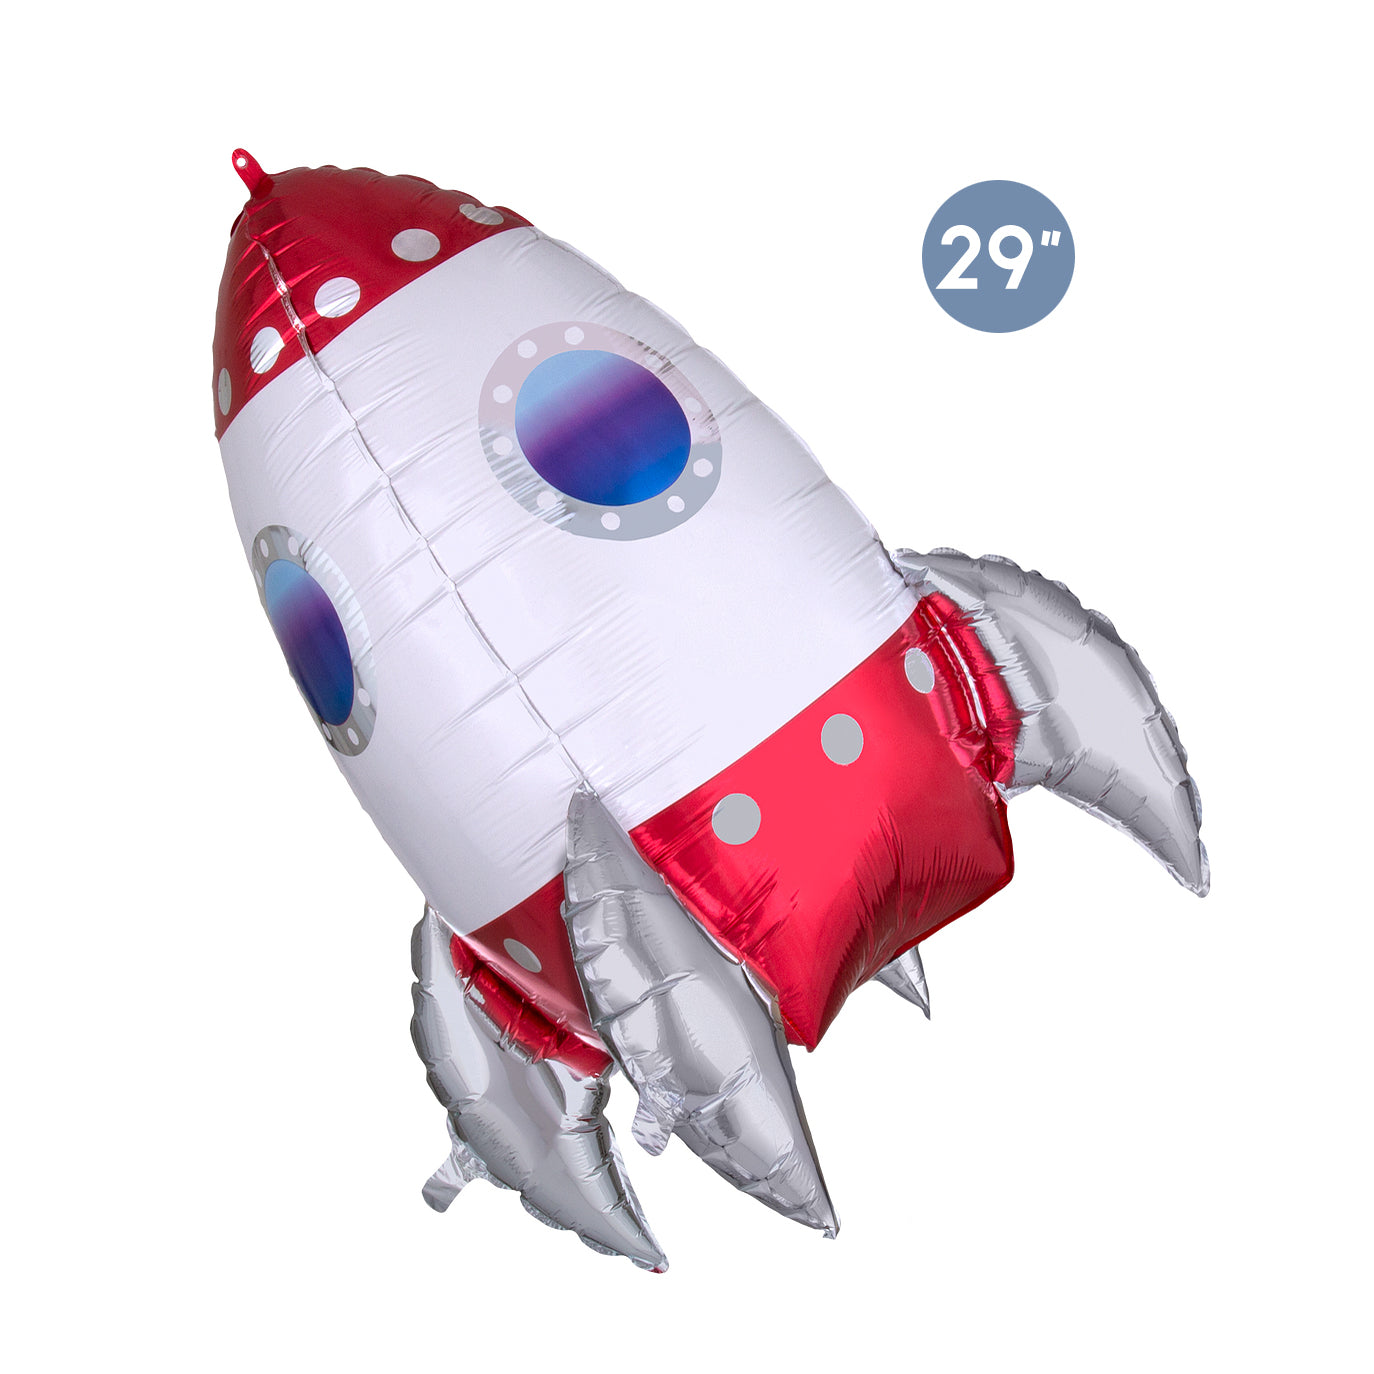 Rocket Balloon for Space Theme Birthday Party 